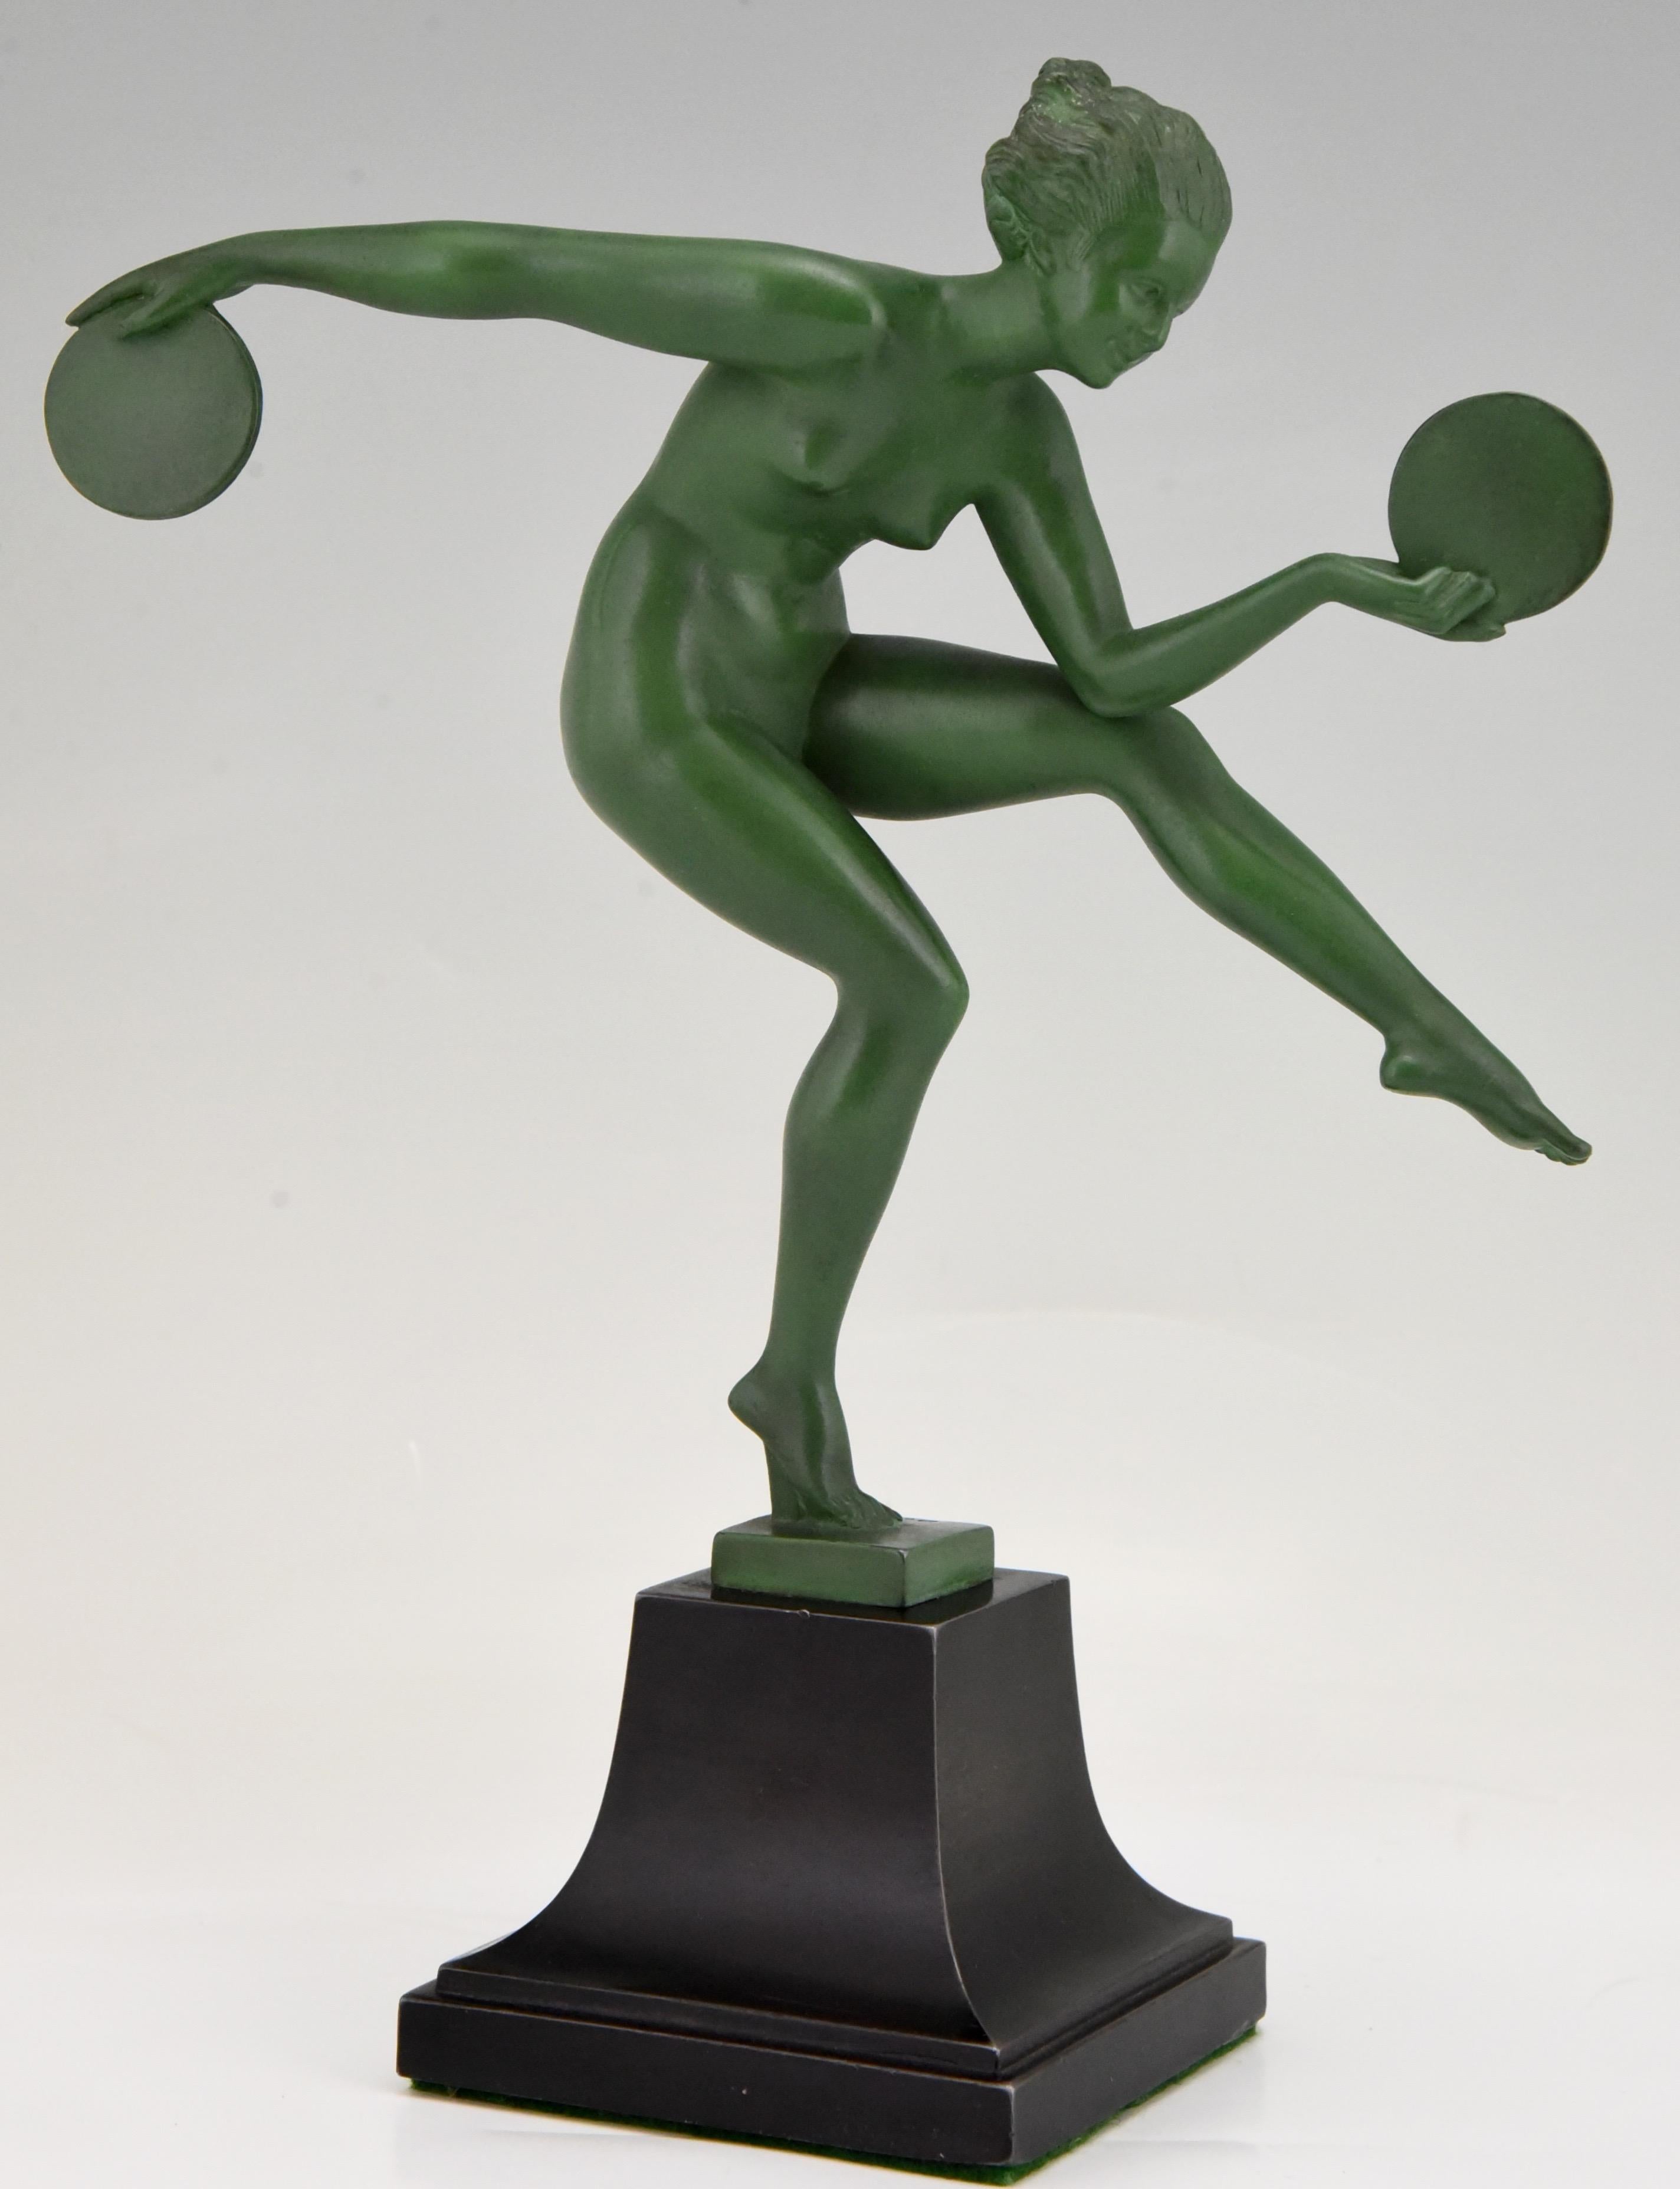 Elegant Art Deco sculpture of nude disc dancer by Derenne.
Pseudonym used by Marcel Bouraine for his art metal sculptures cast by the Max Le Verrier foundry.
This sculpture is in Art metal with a green patina and stands on a black metal base.